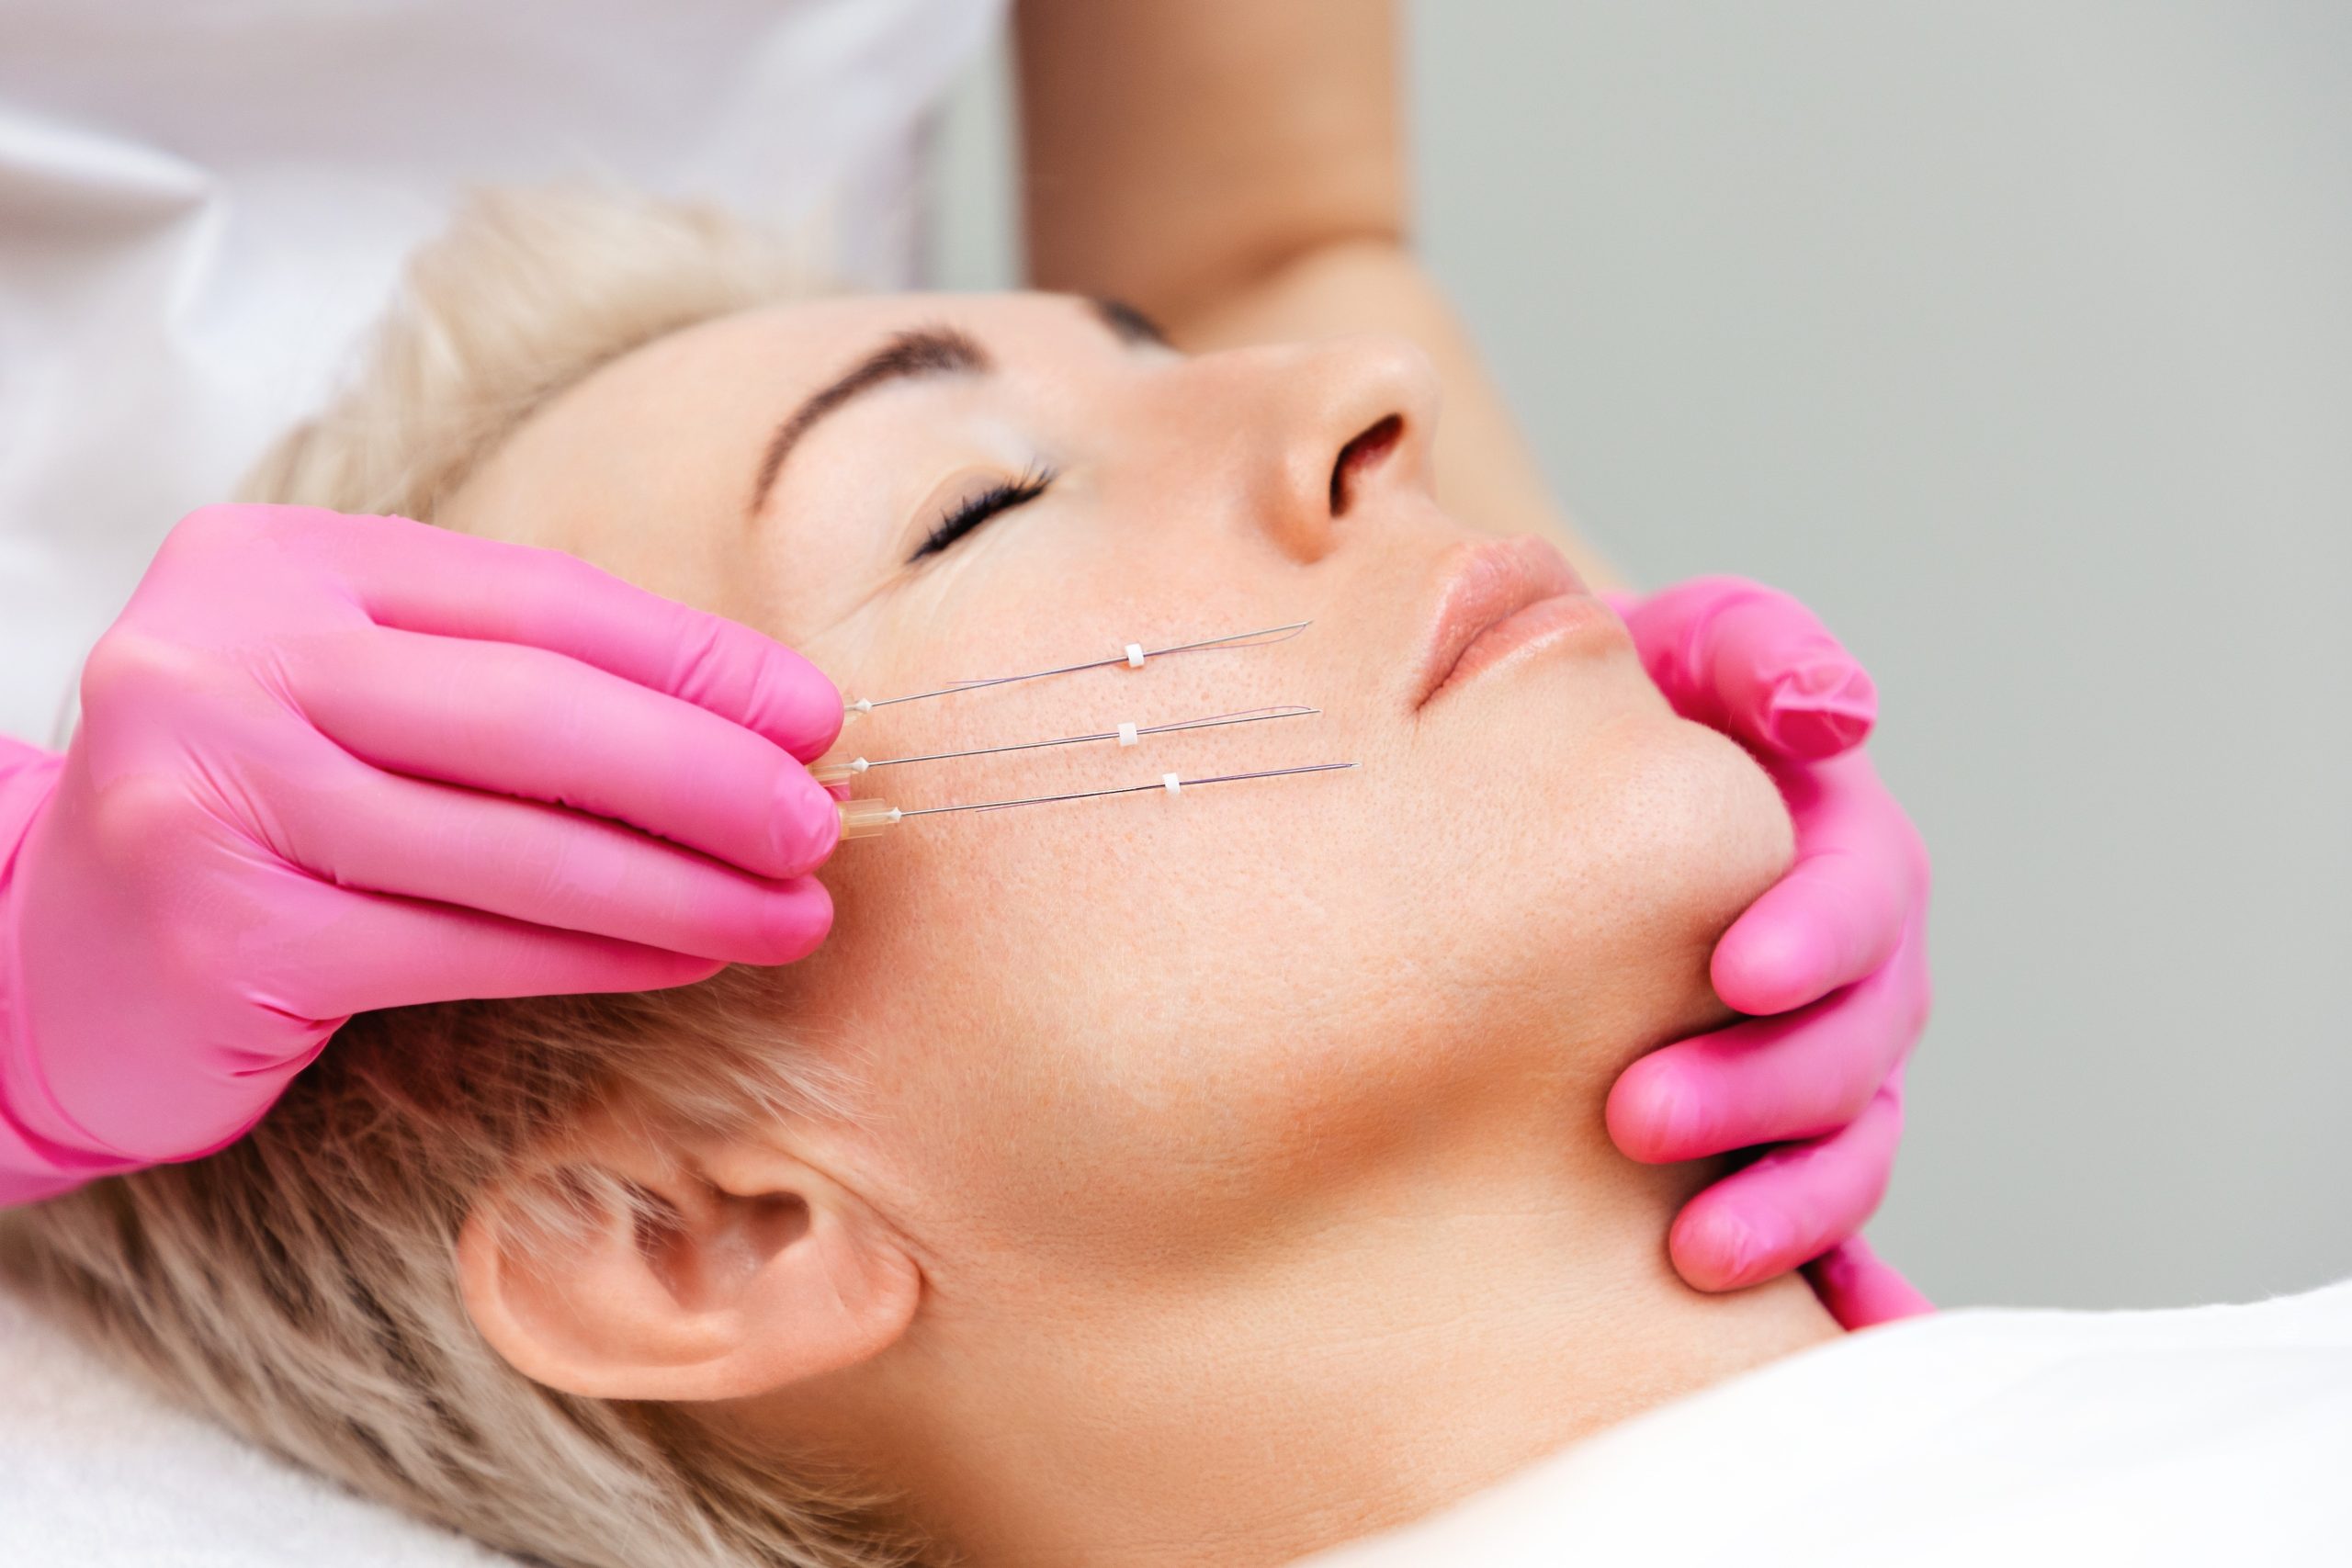 Don't Believe the Hype About PDO Thread Lifts - Greenwich Medical Spa